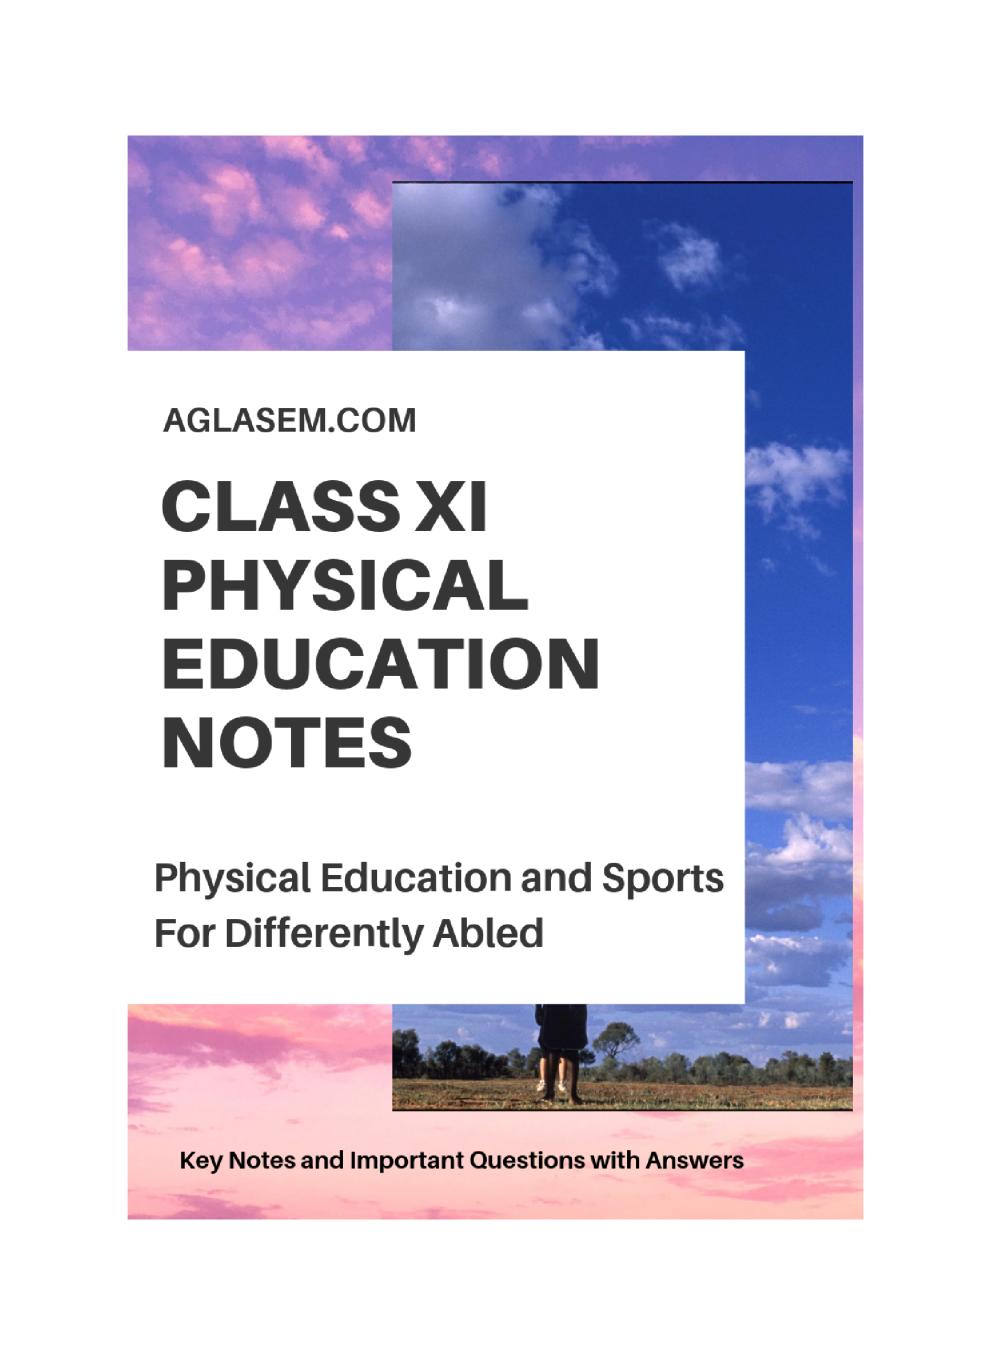 Class 11 Physical Education Notes for Physical Education and Sports for Differently Abled - Page 1